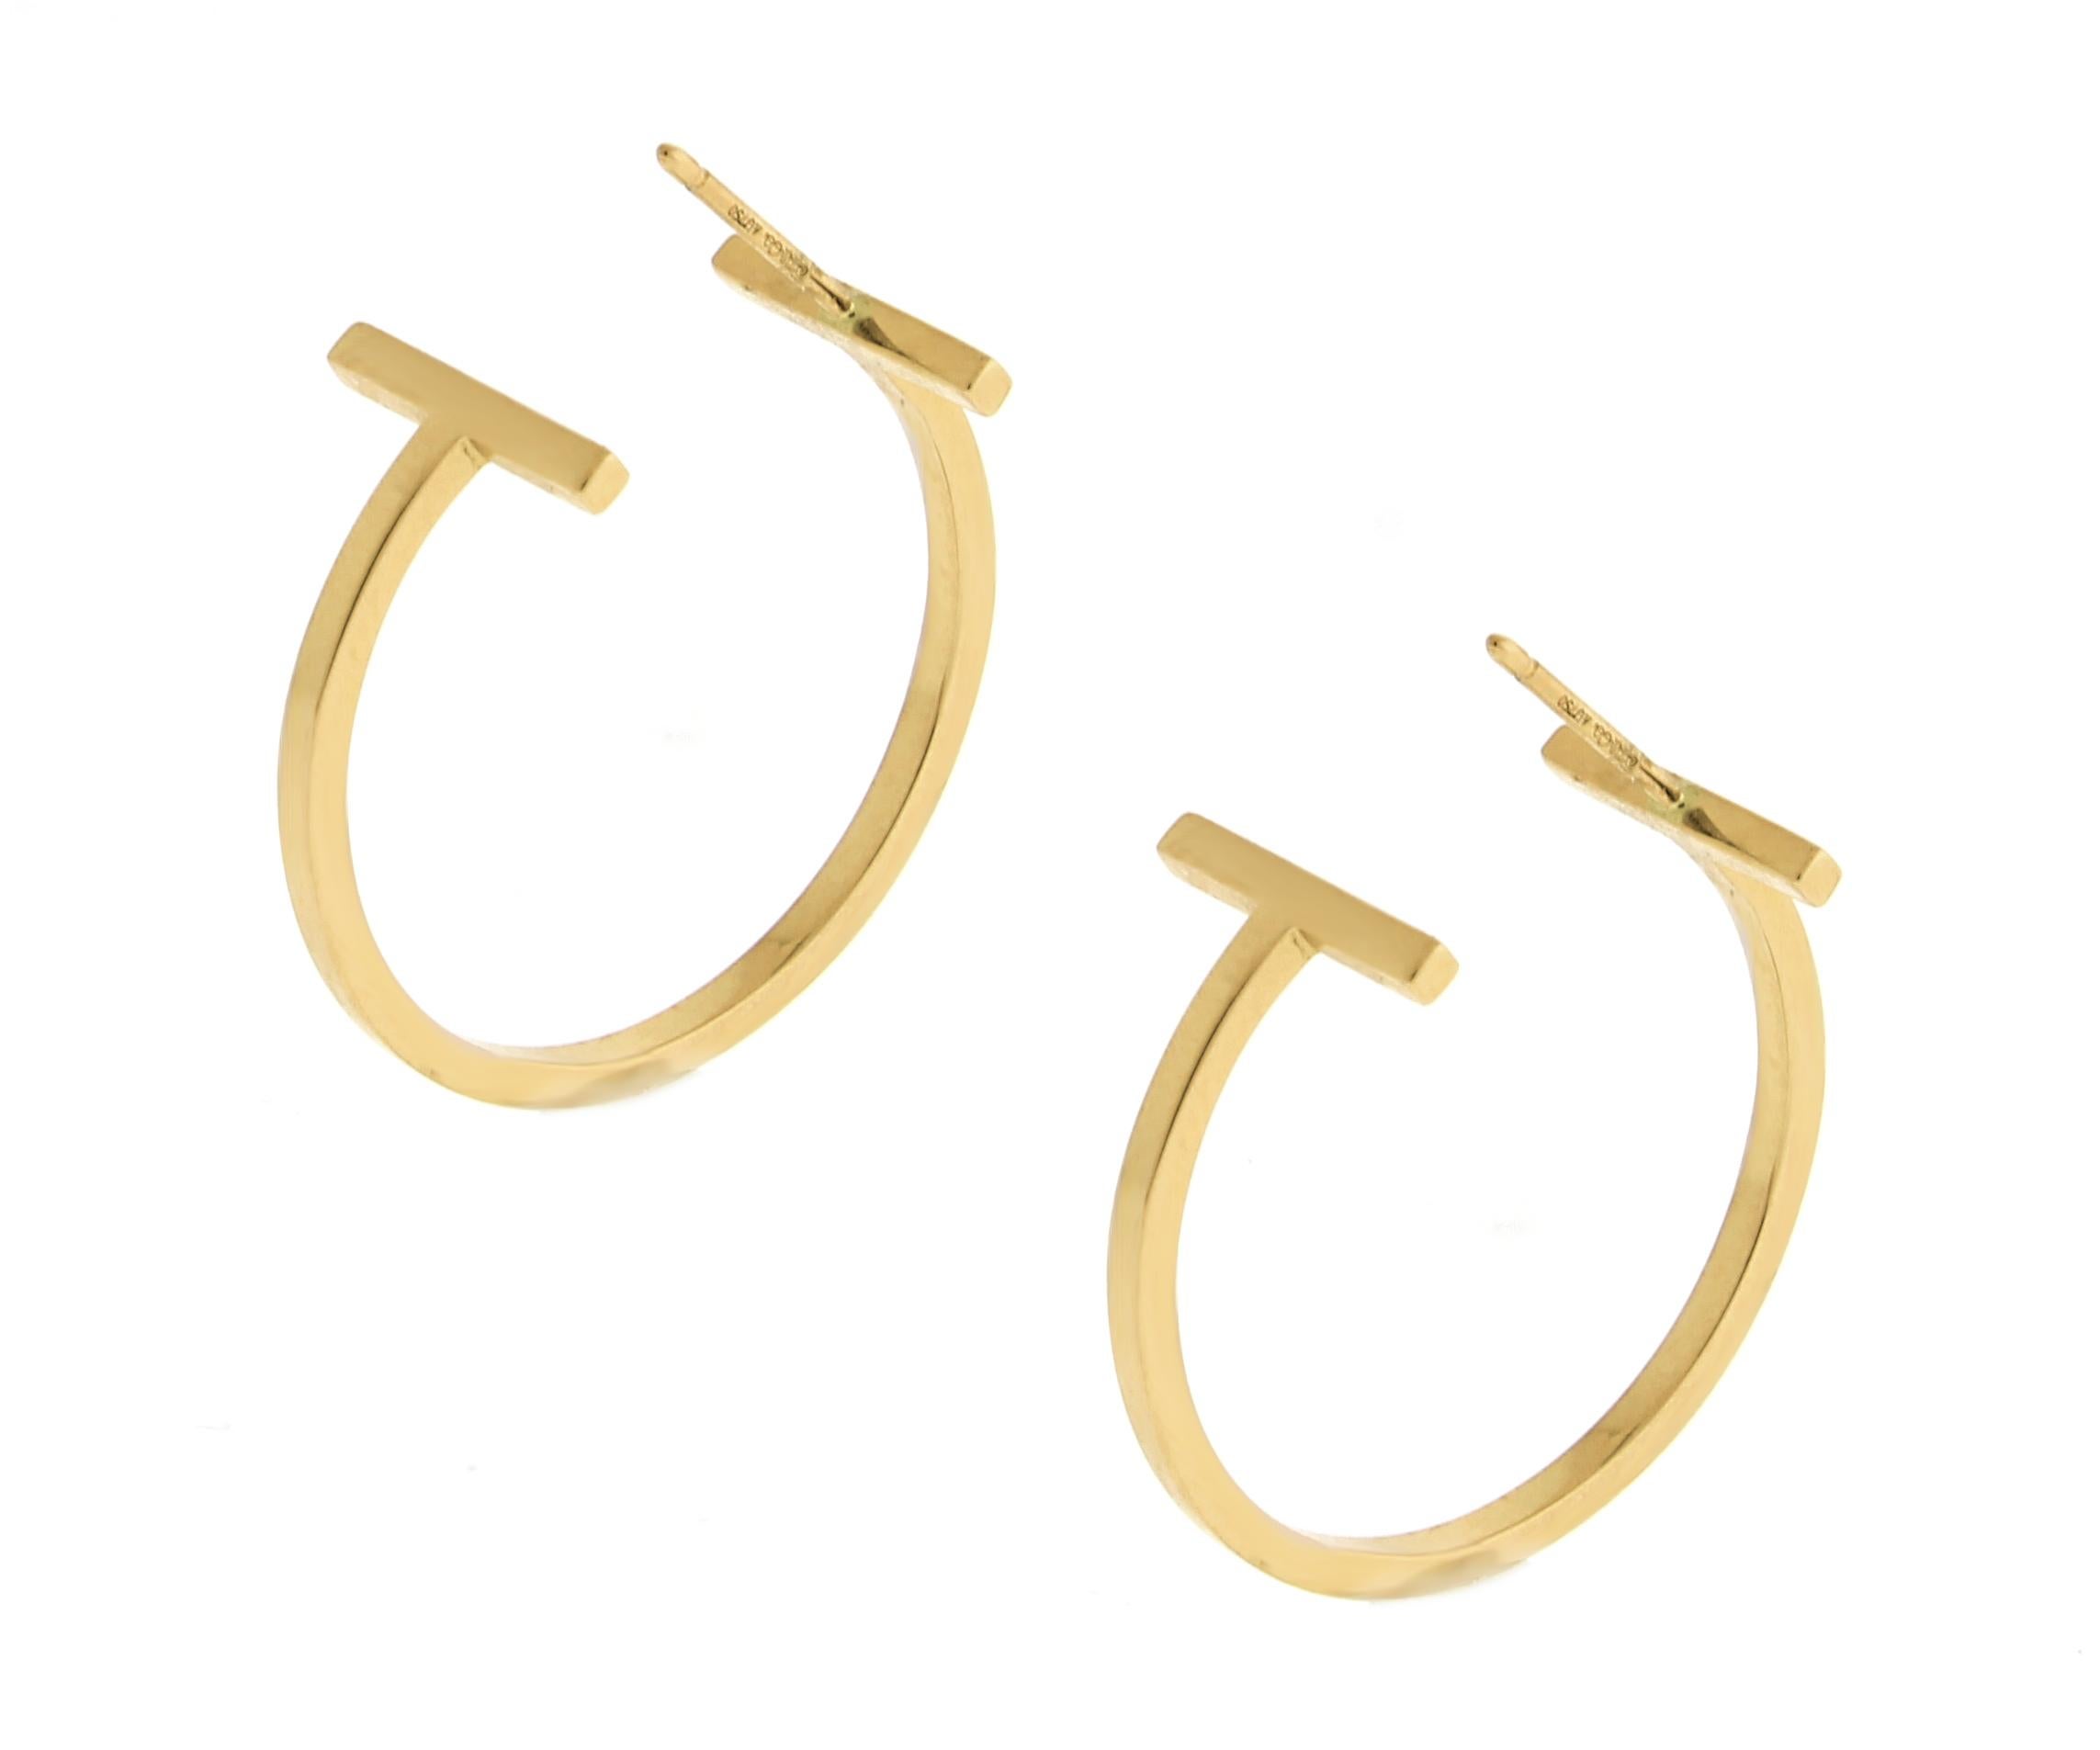 The Tiffany T collection, Graphic angles and clean lines blend to create the beautiful clarity.    Bold and elegant, these hoops are a modern interpretation of a classic design.

18 karat rose gold
Size medium 1 inch diameter